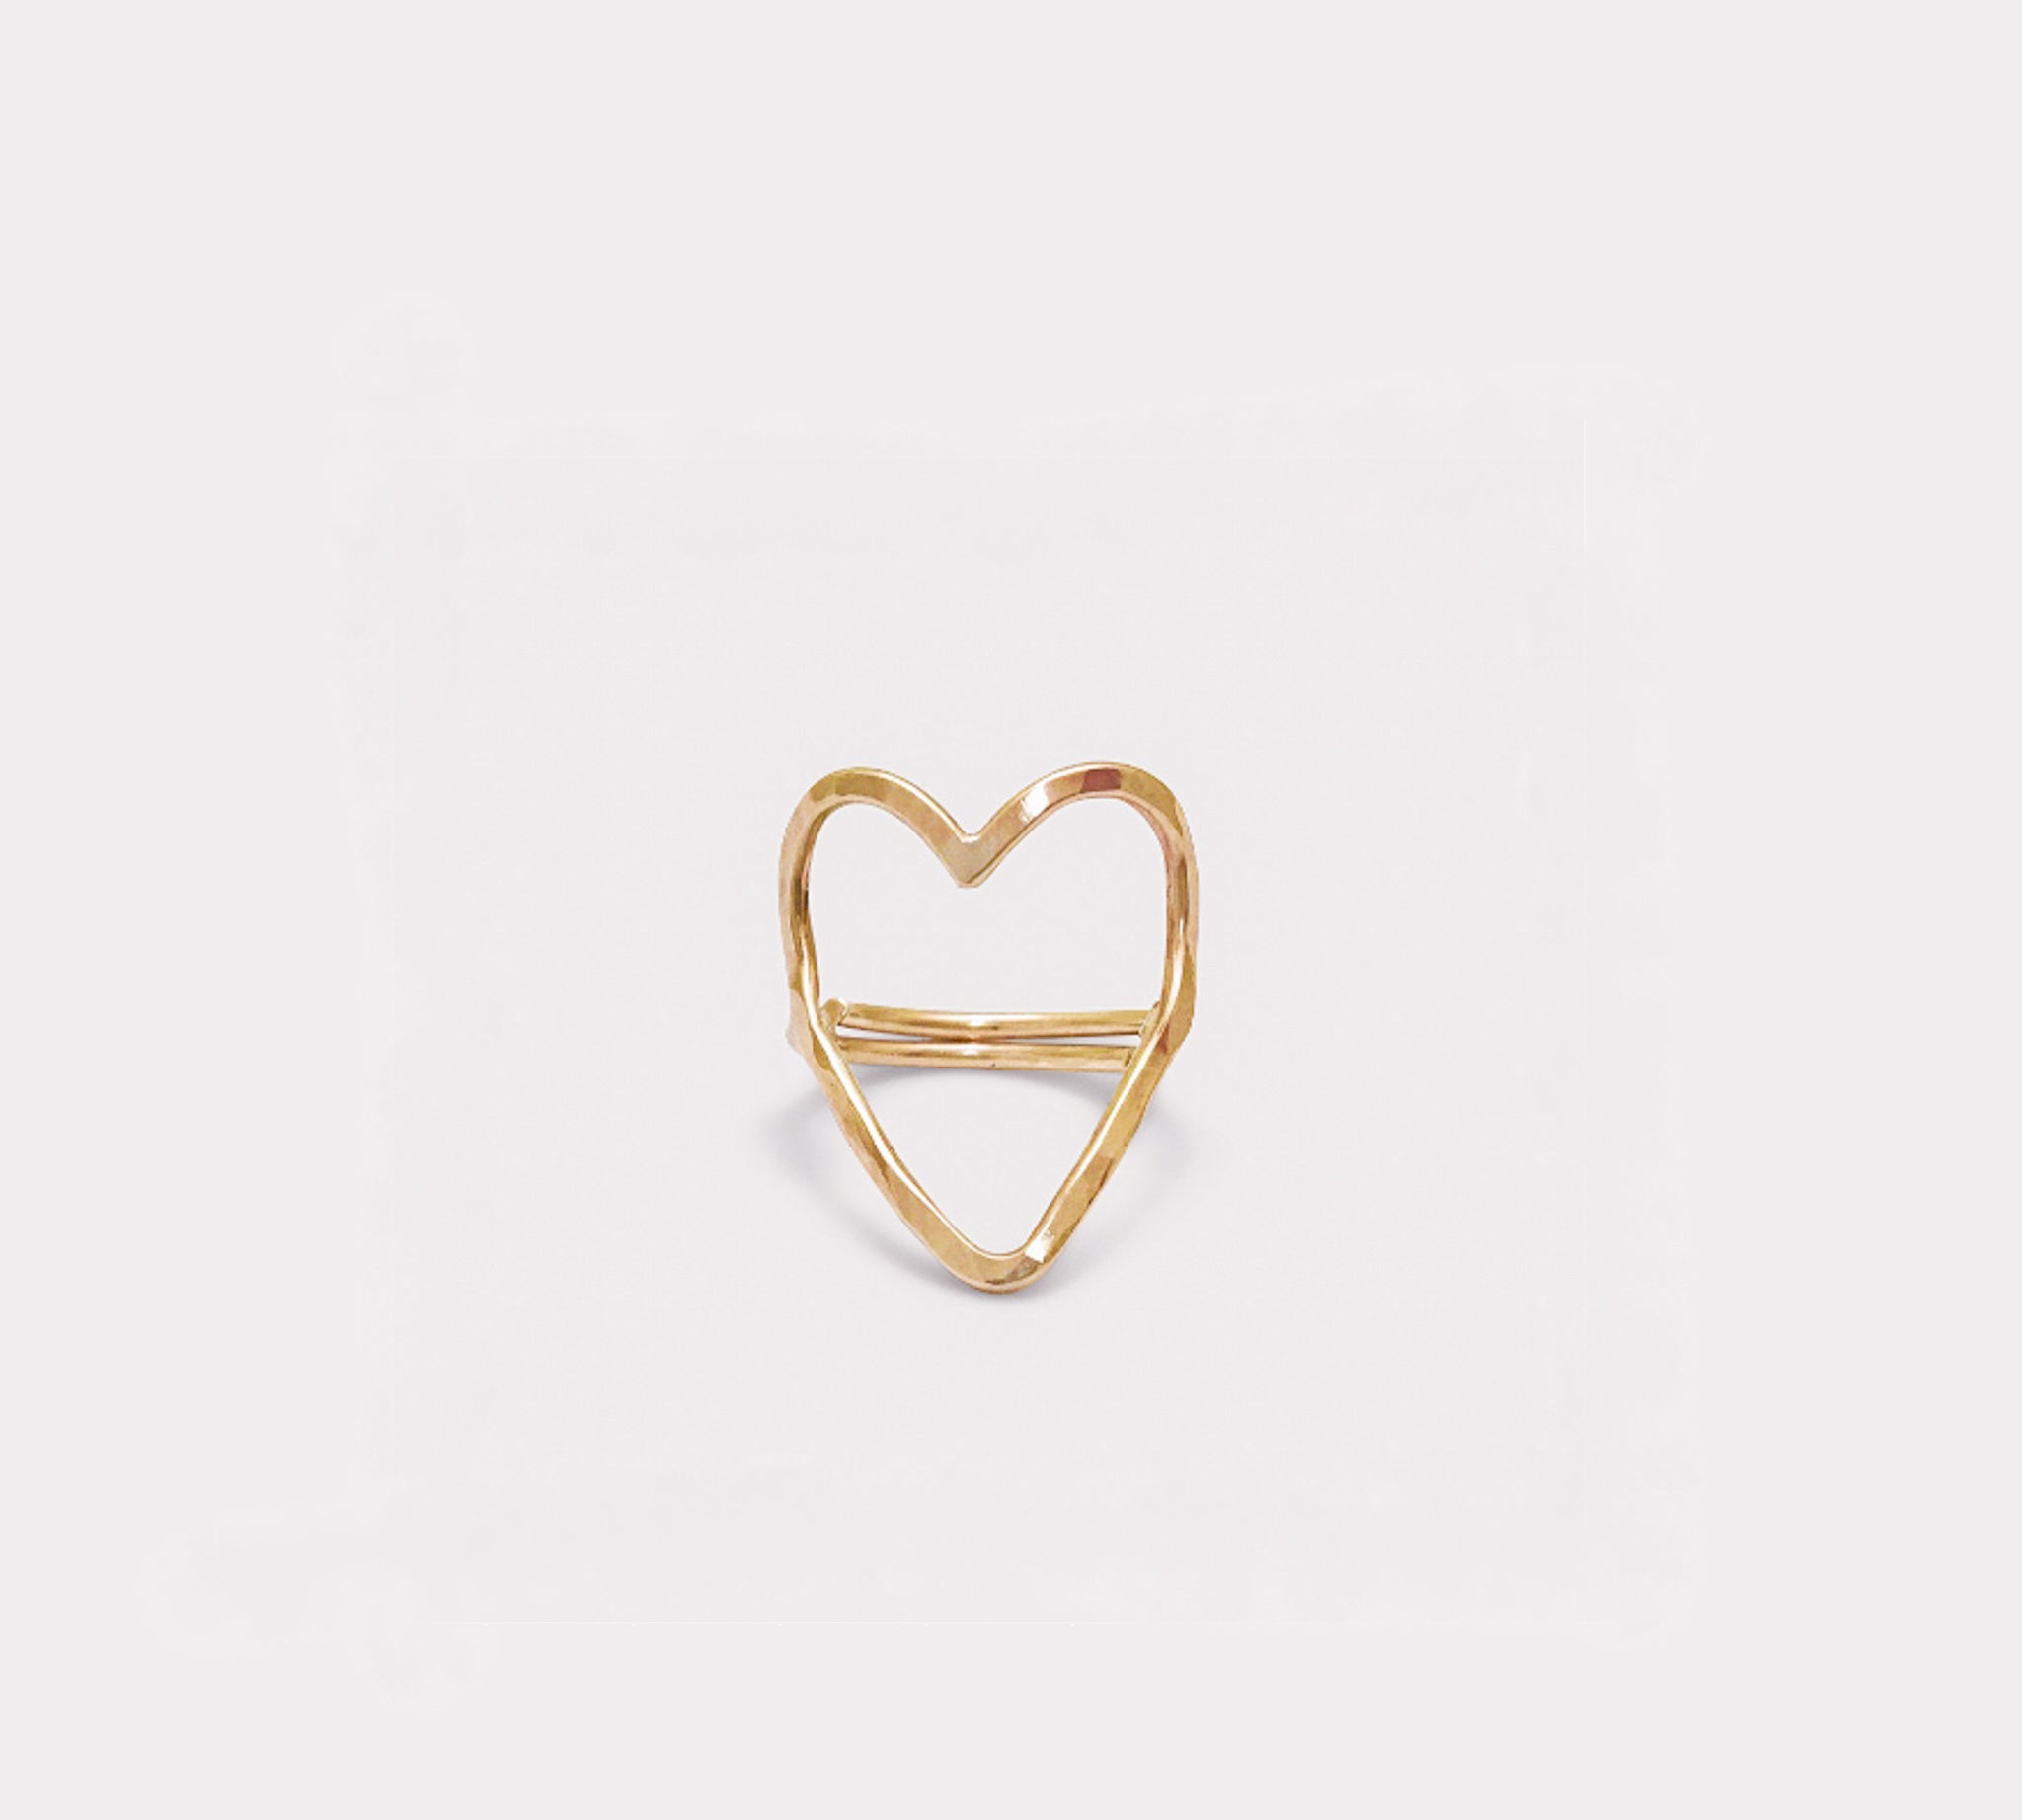 Gold Open Heart Ring, featured image